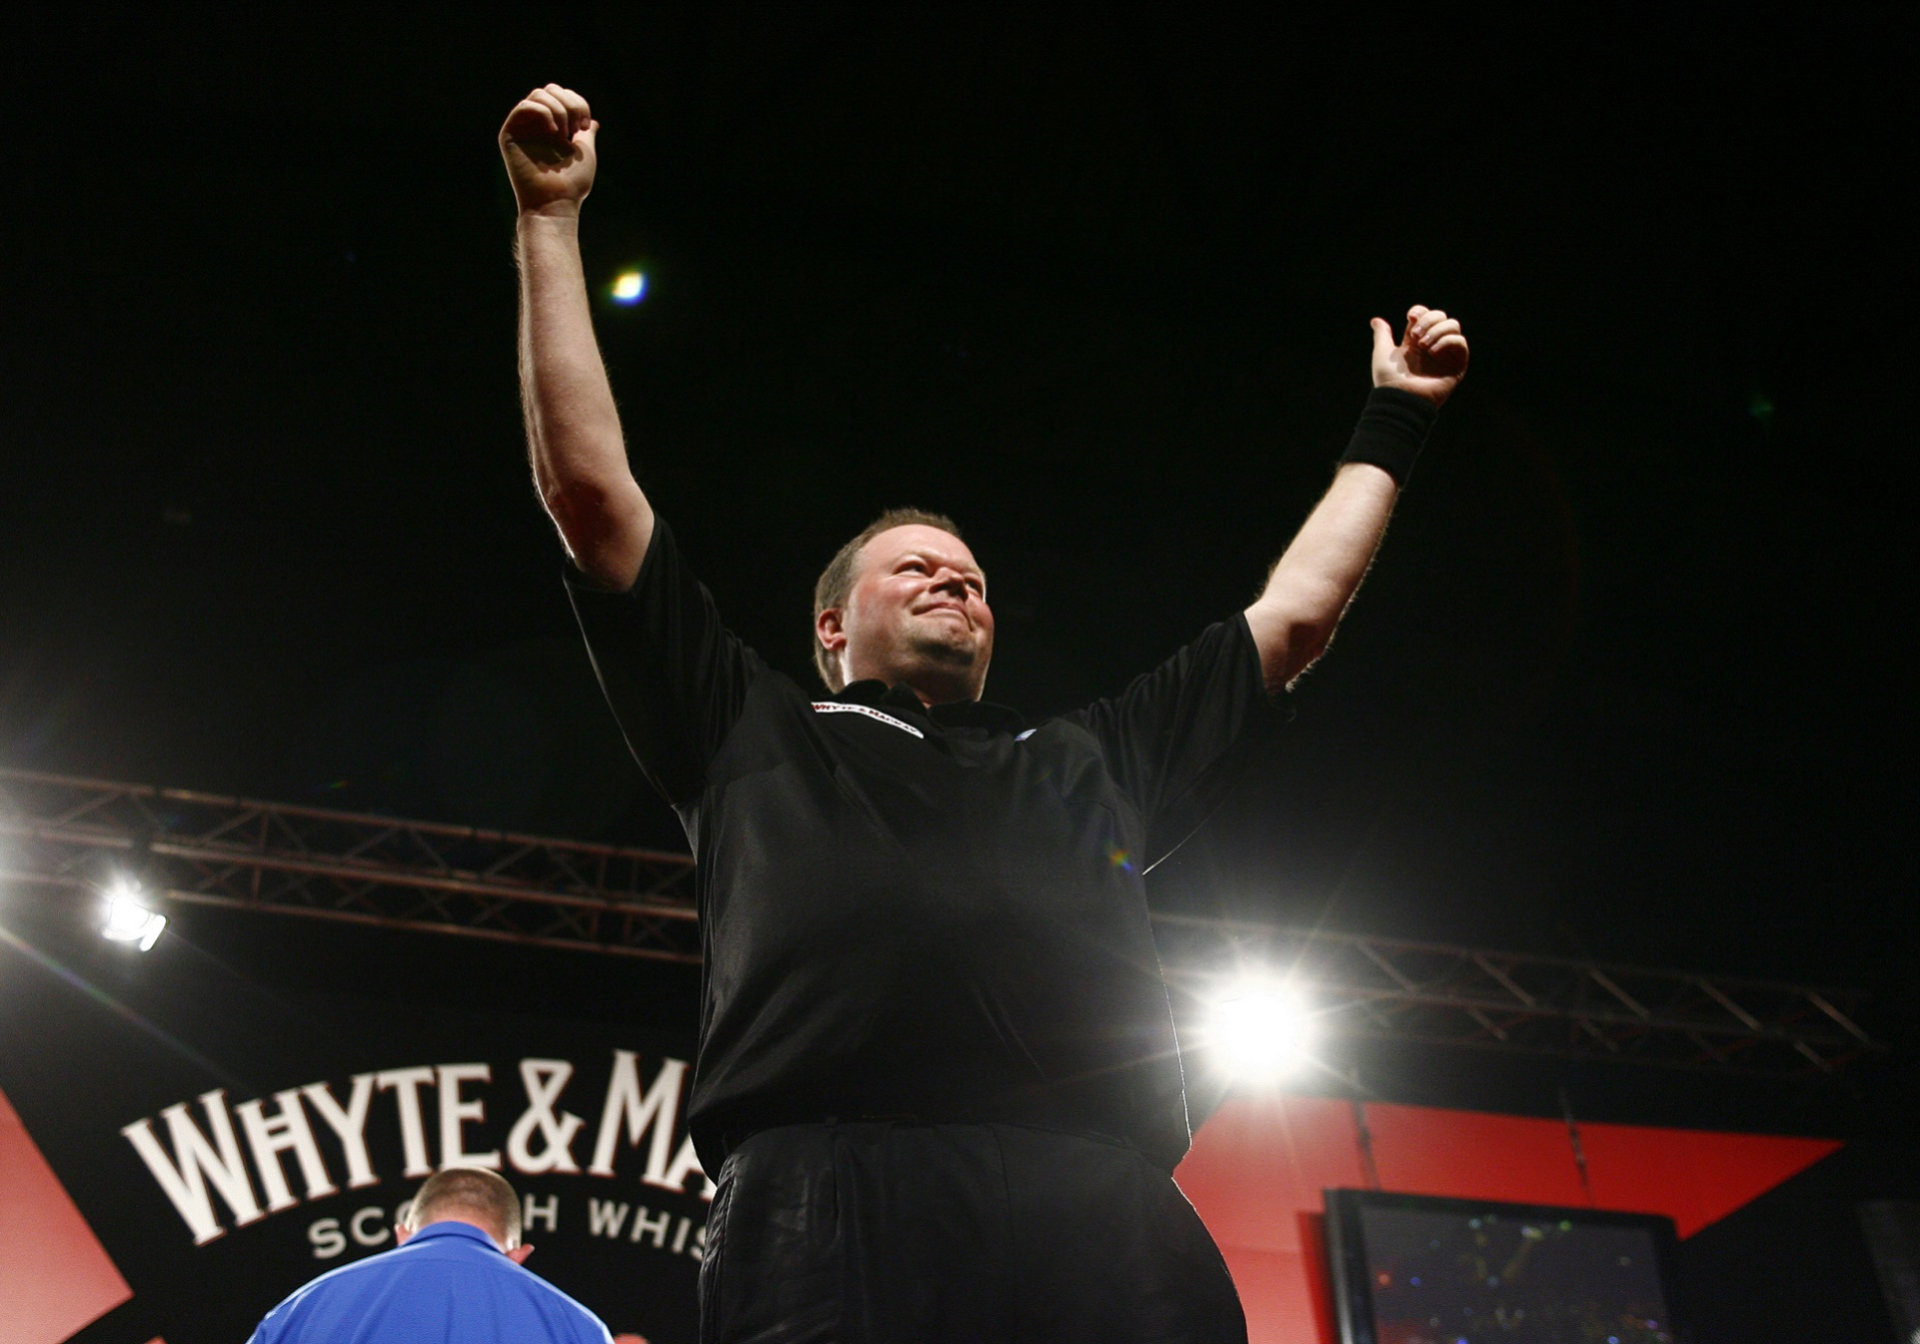 2010 - Barney lands another nine-darter, this time against Terry Jenkins